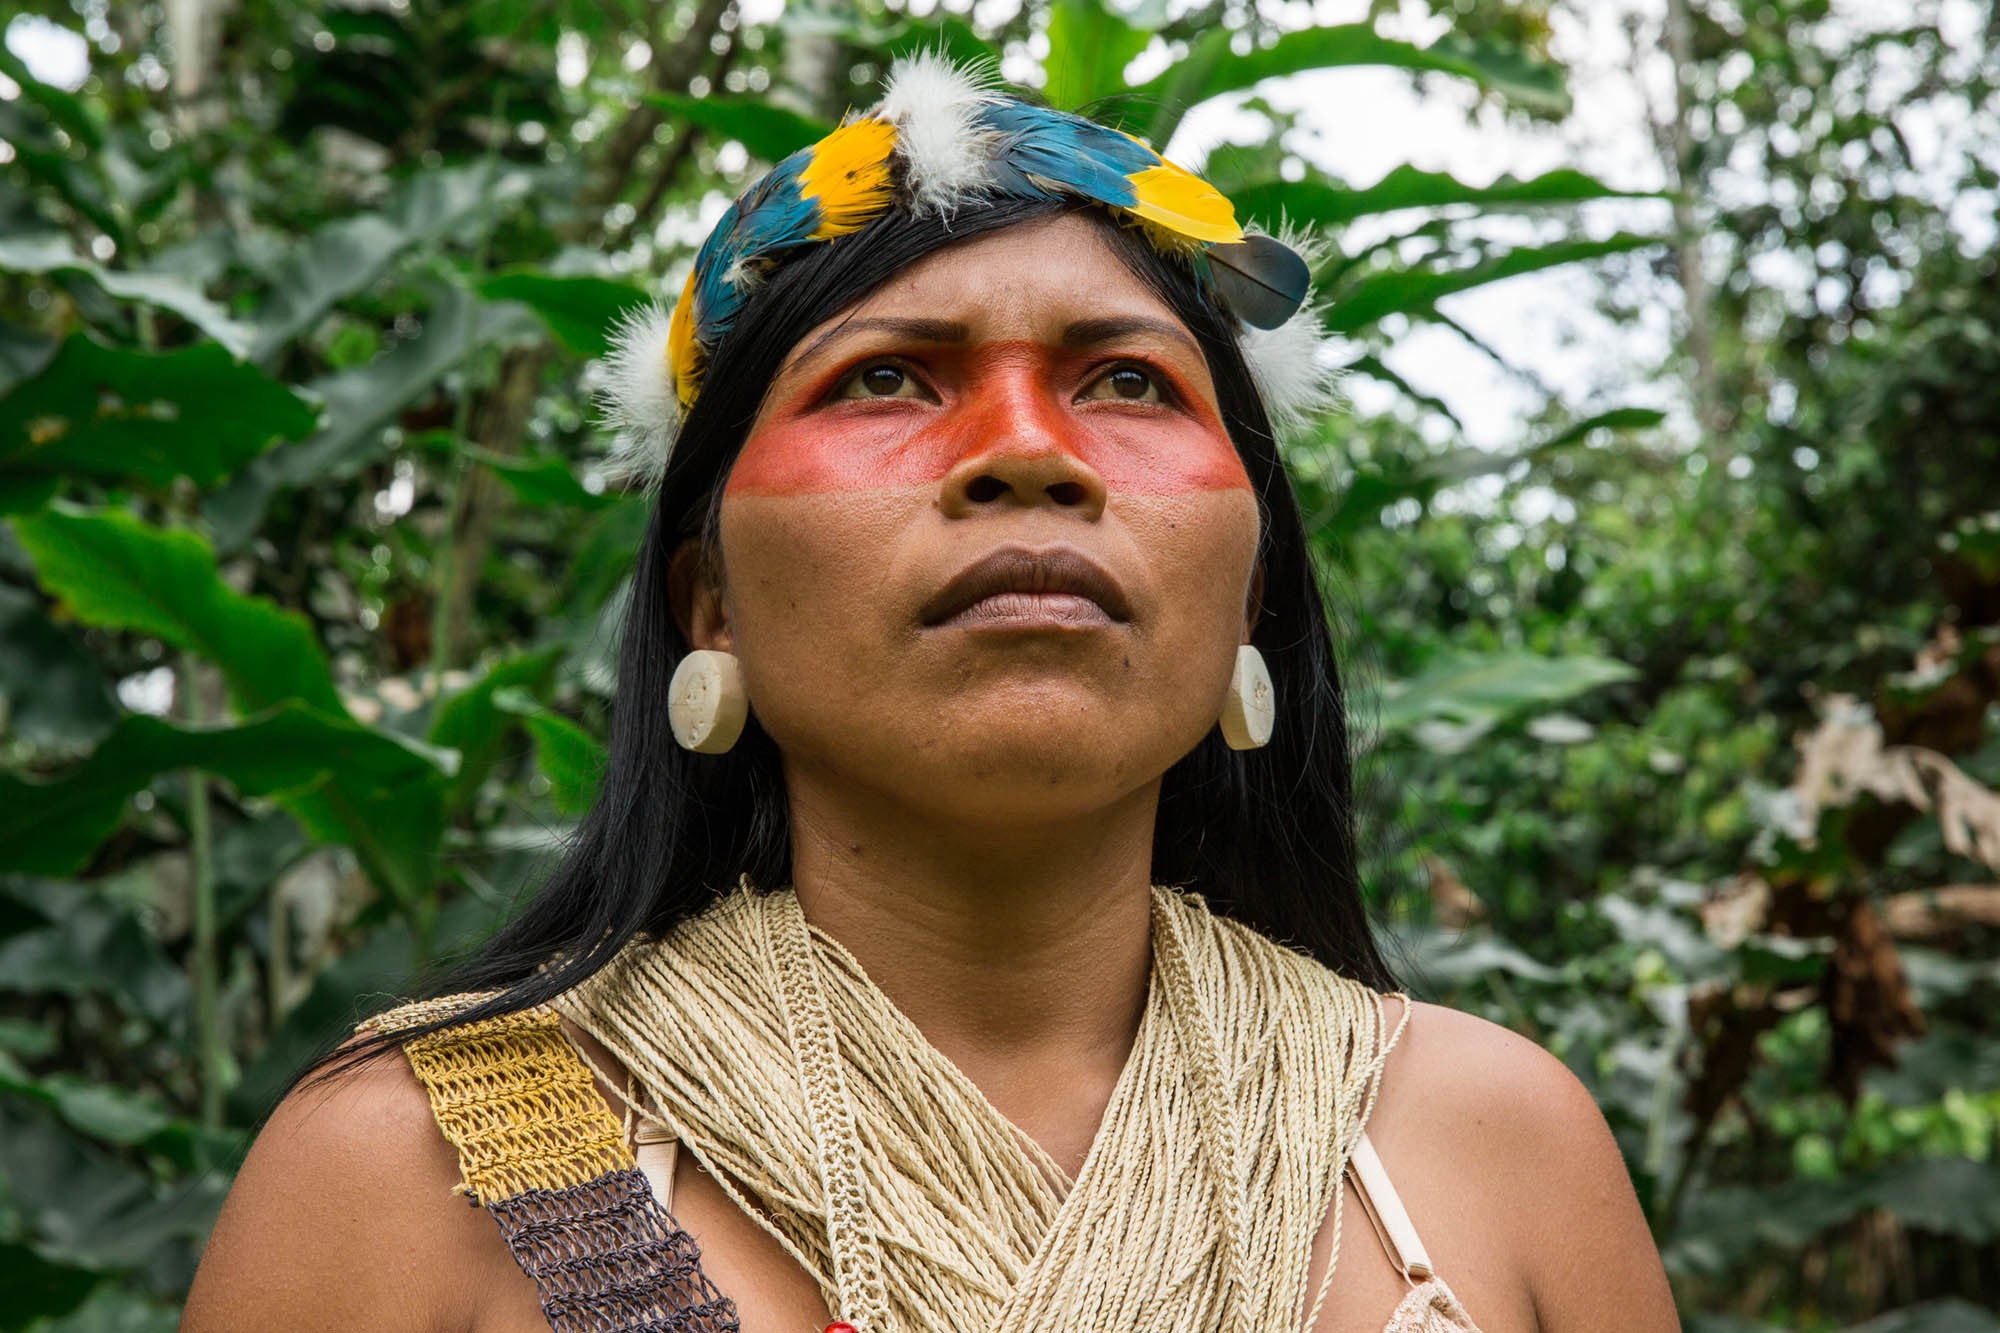 Nemonte Nenquimo is an Indigenous activist and leader of the Waorani nation from the Amazonian region of Ecuador